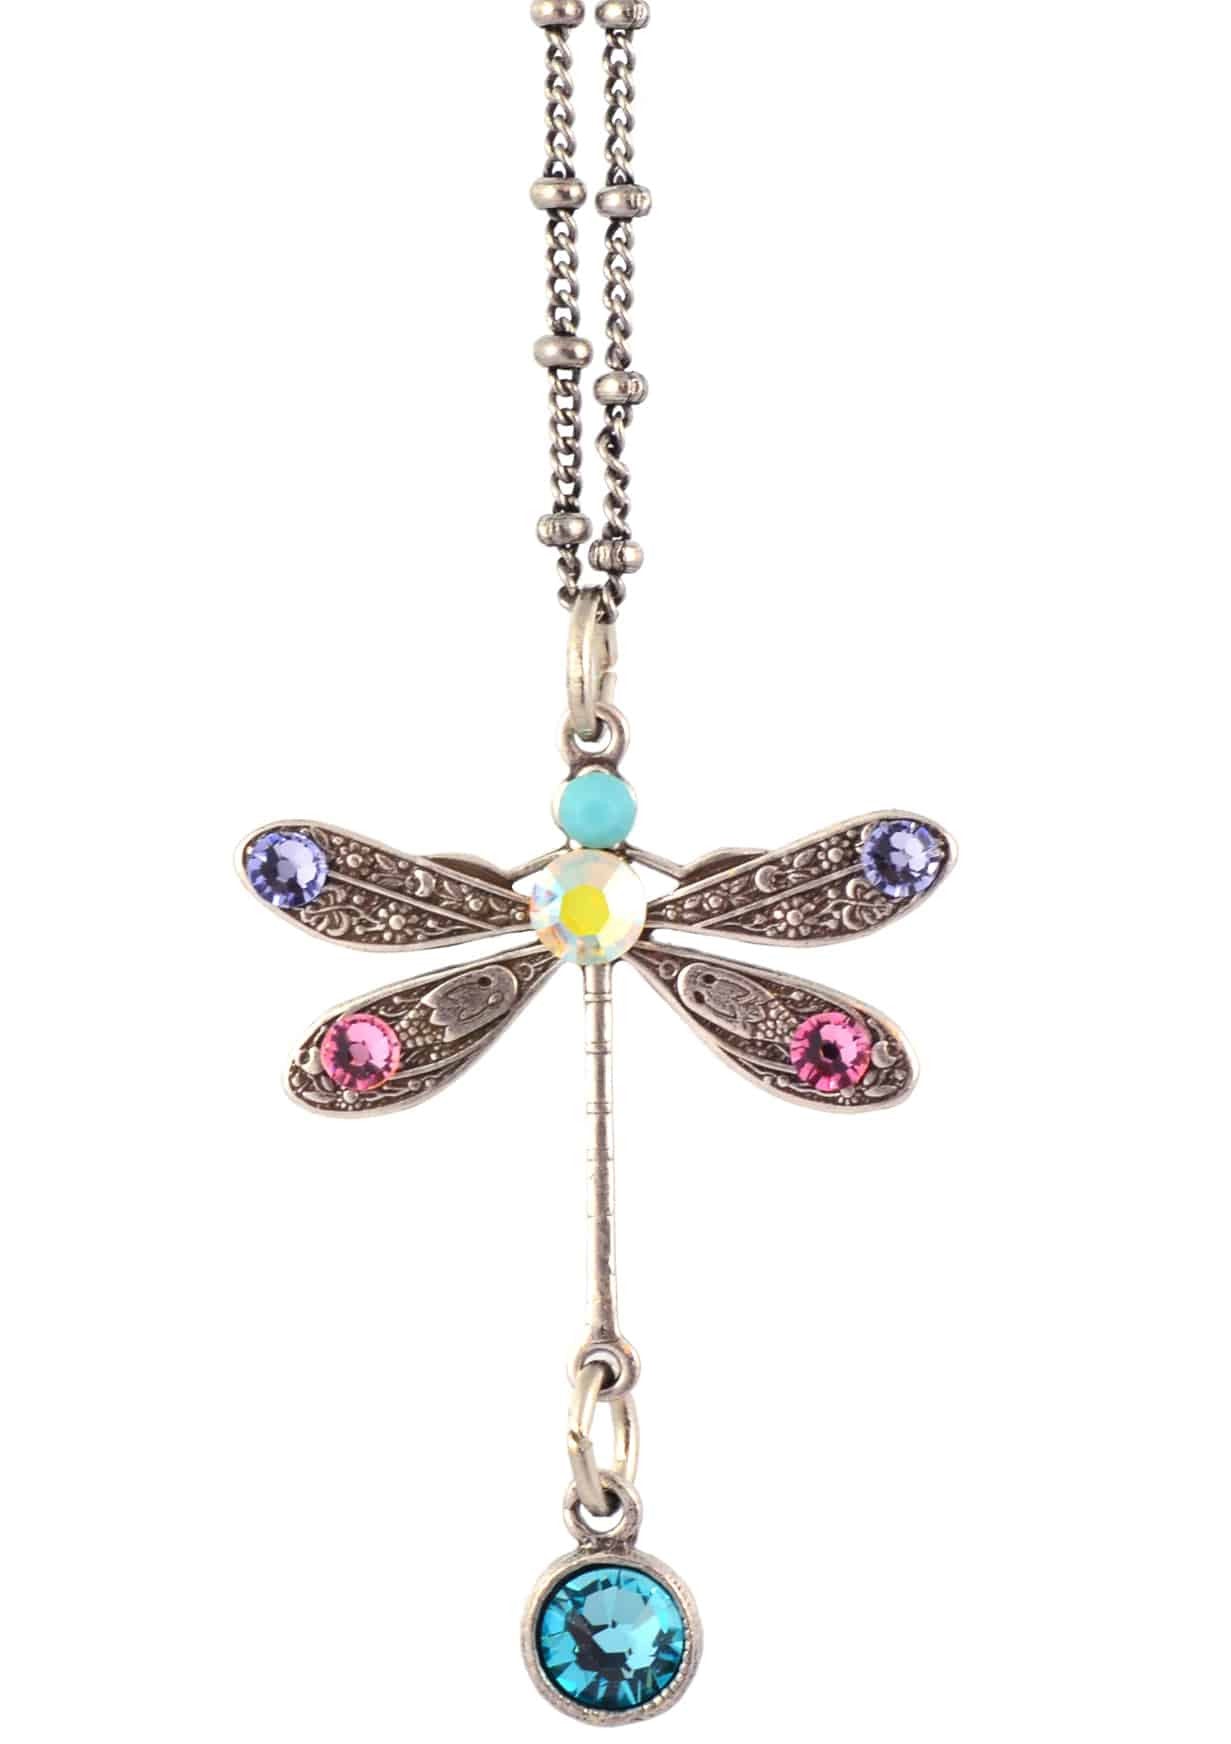 Anne Koplik Dragonfly Pendant Necklace, Silver Plated with crystals, 18 NSG402LTU